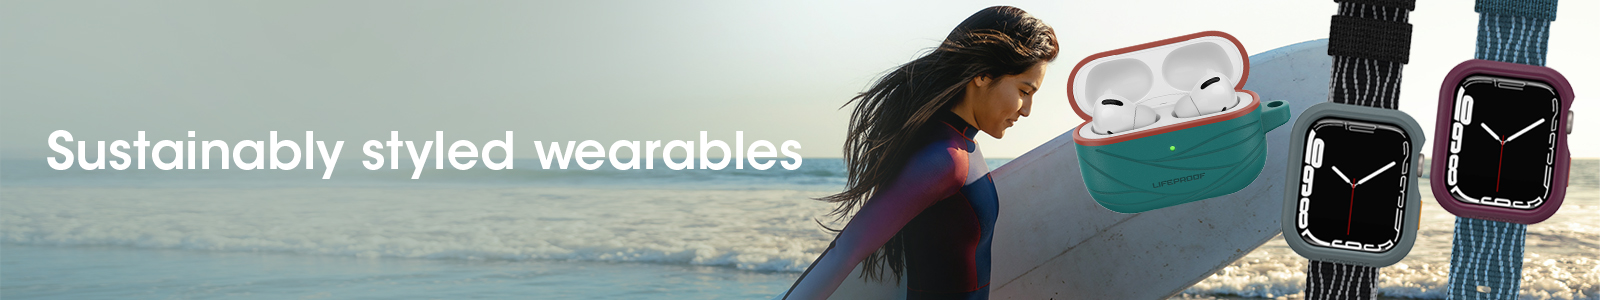 Sustainably styled wearables